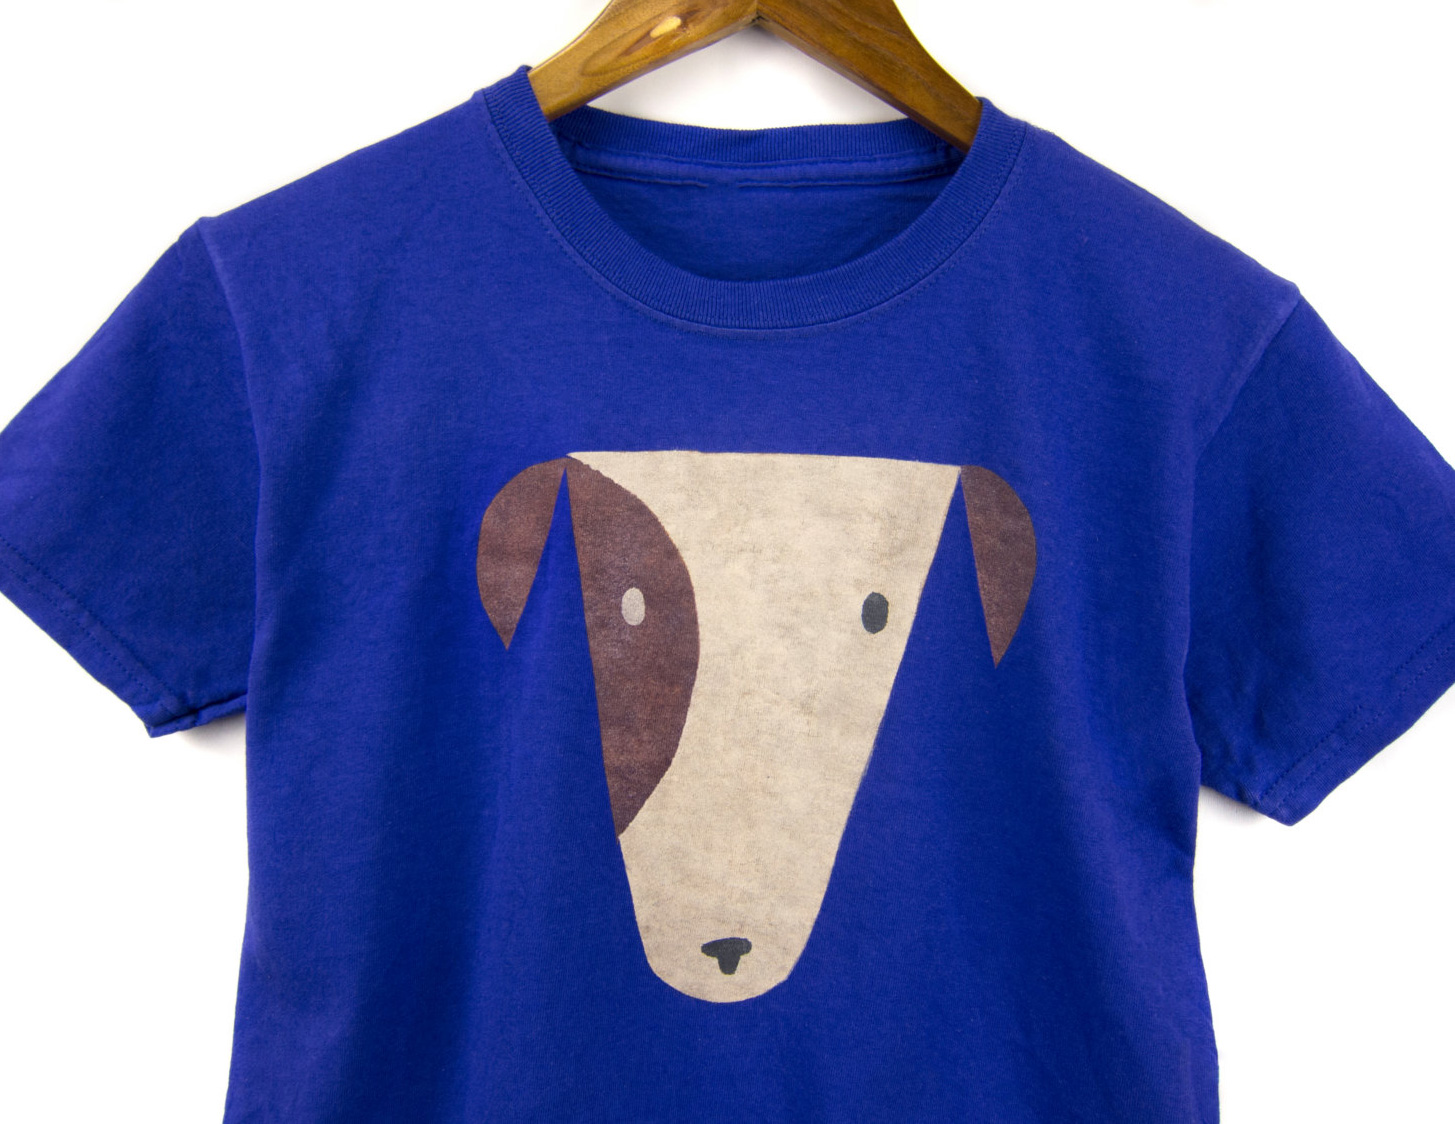 Hand-stenciled Dog Tees from Two String Jane